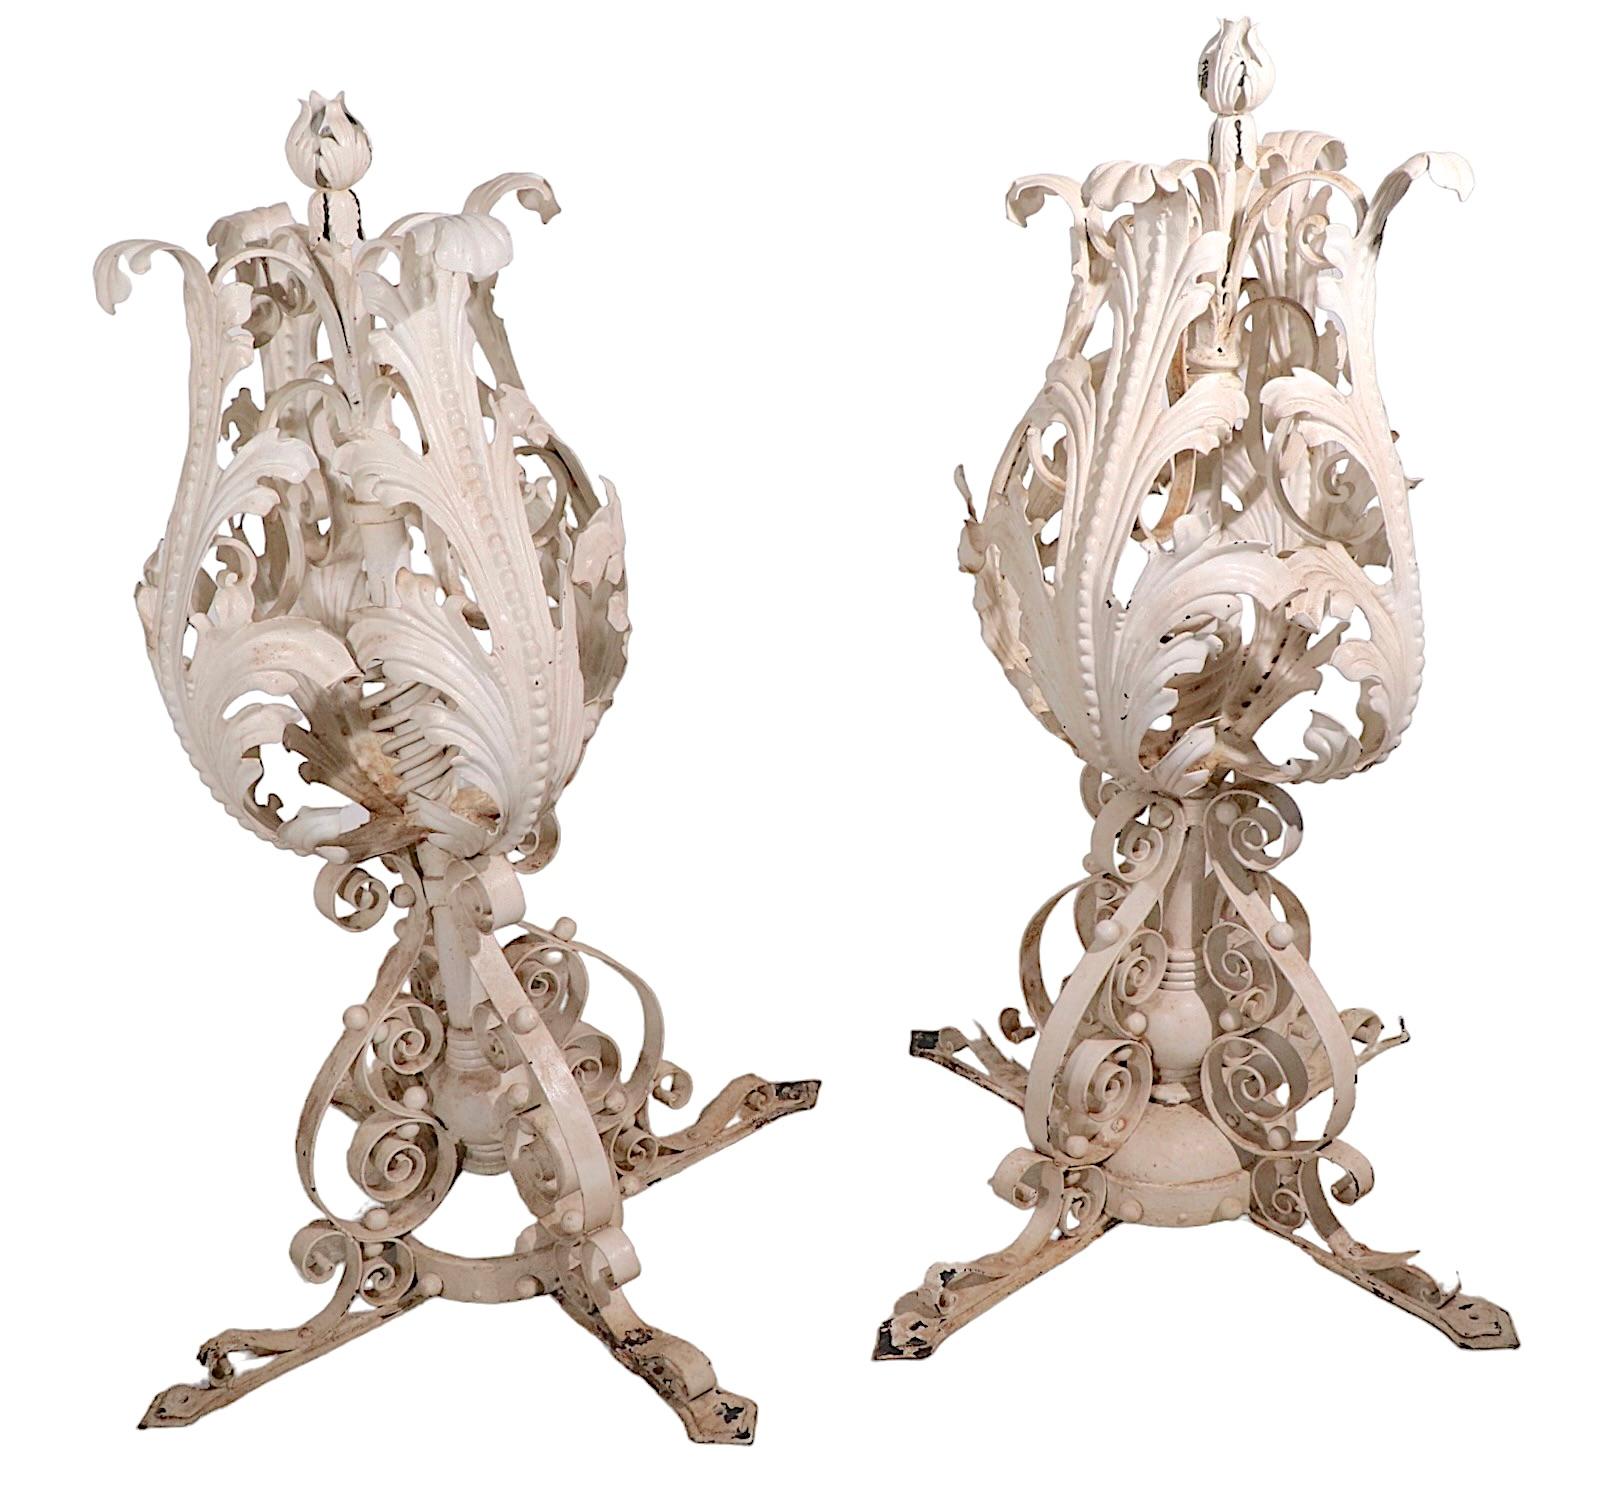  Large Pr. Wrought Iron Finials English  19th C. For Sale 1